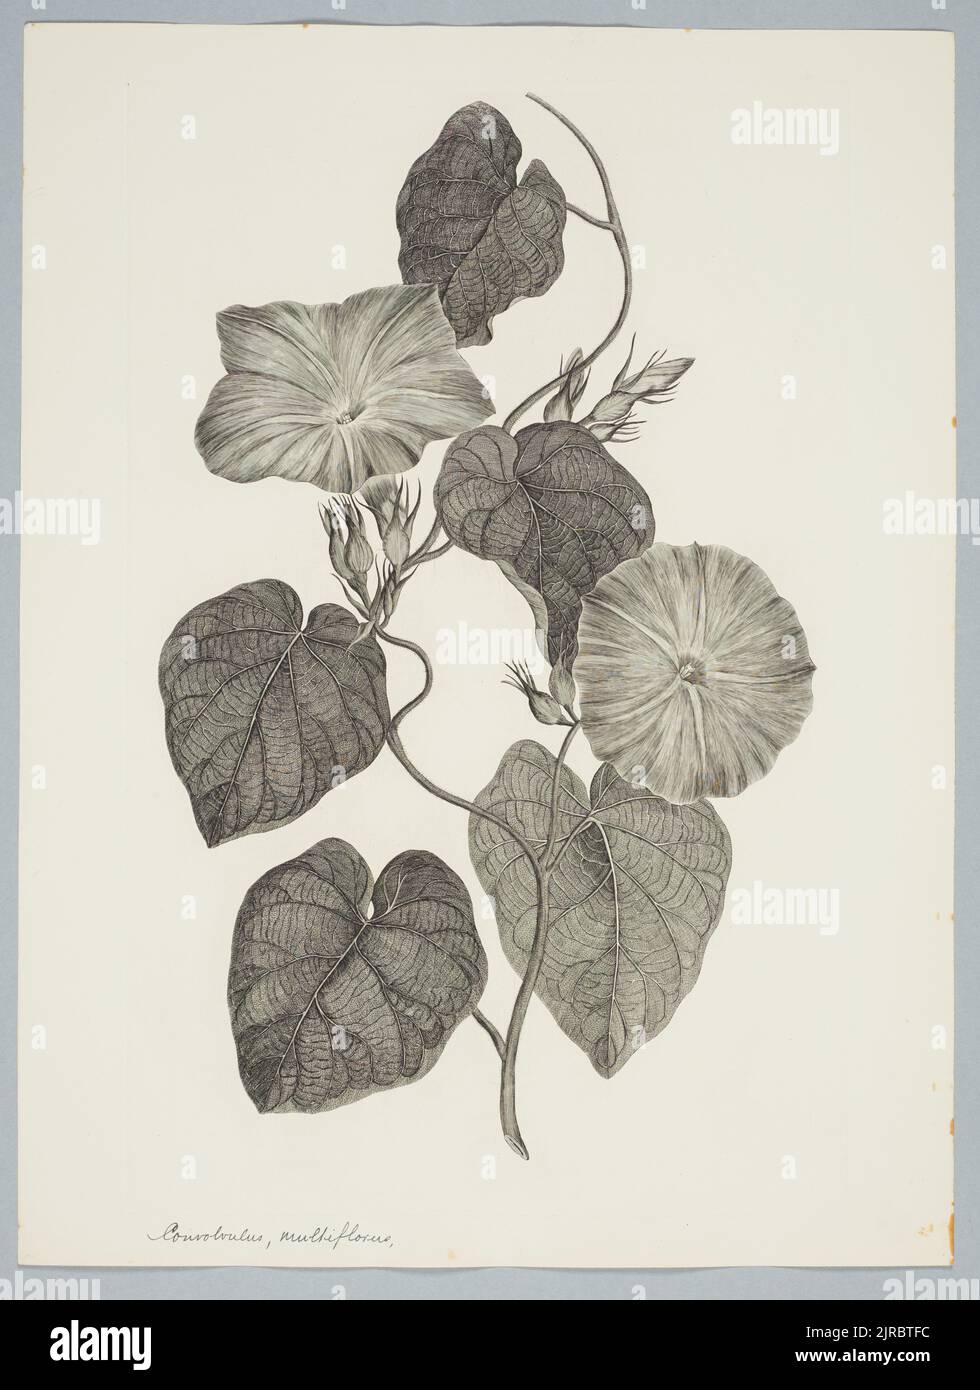 Ipomoea indica (Burman f.) Merrill, by Sydney Parkinson. Gift of the British Museum, 1895. Stock Photo